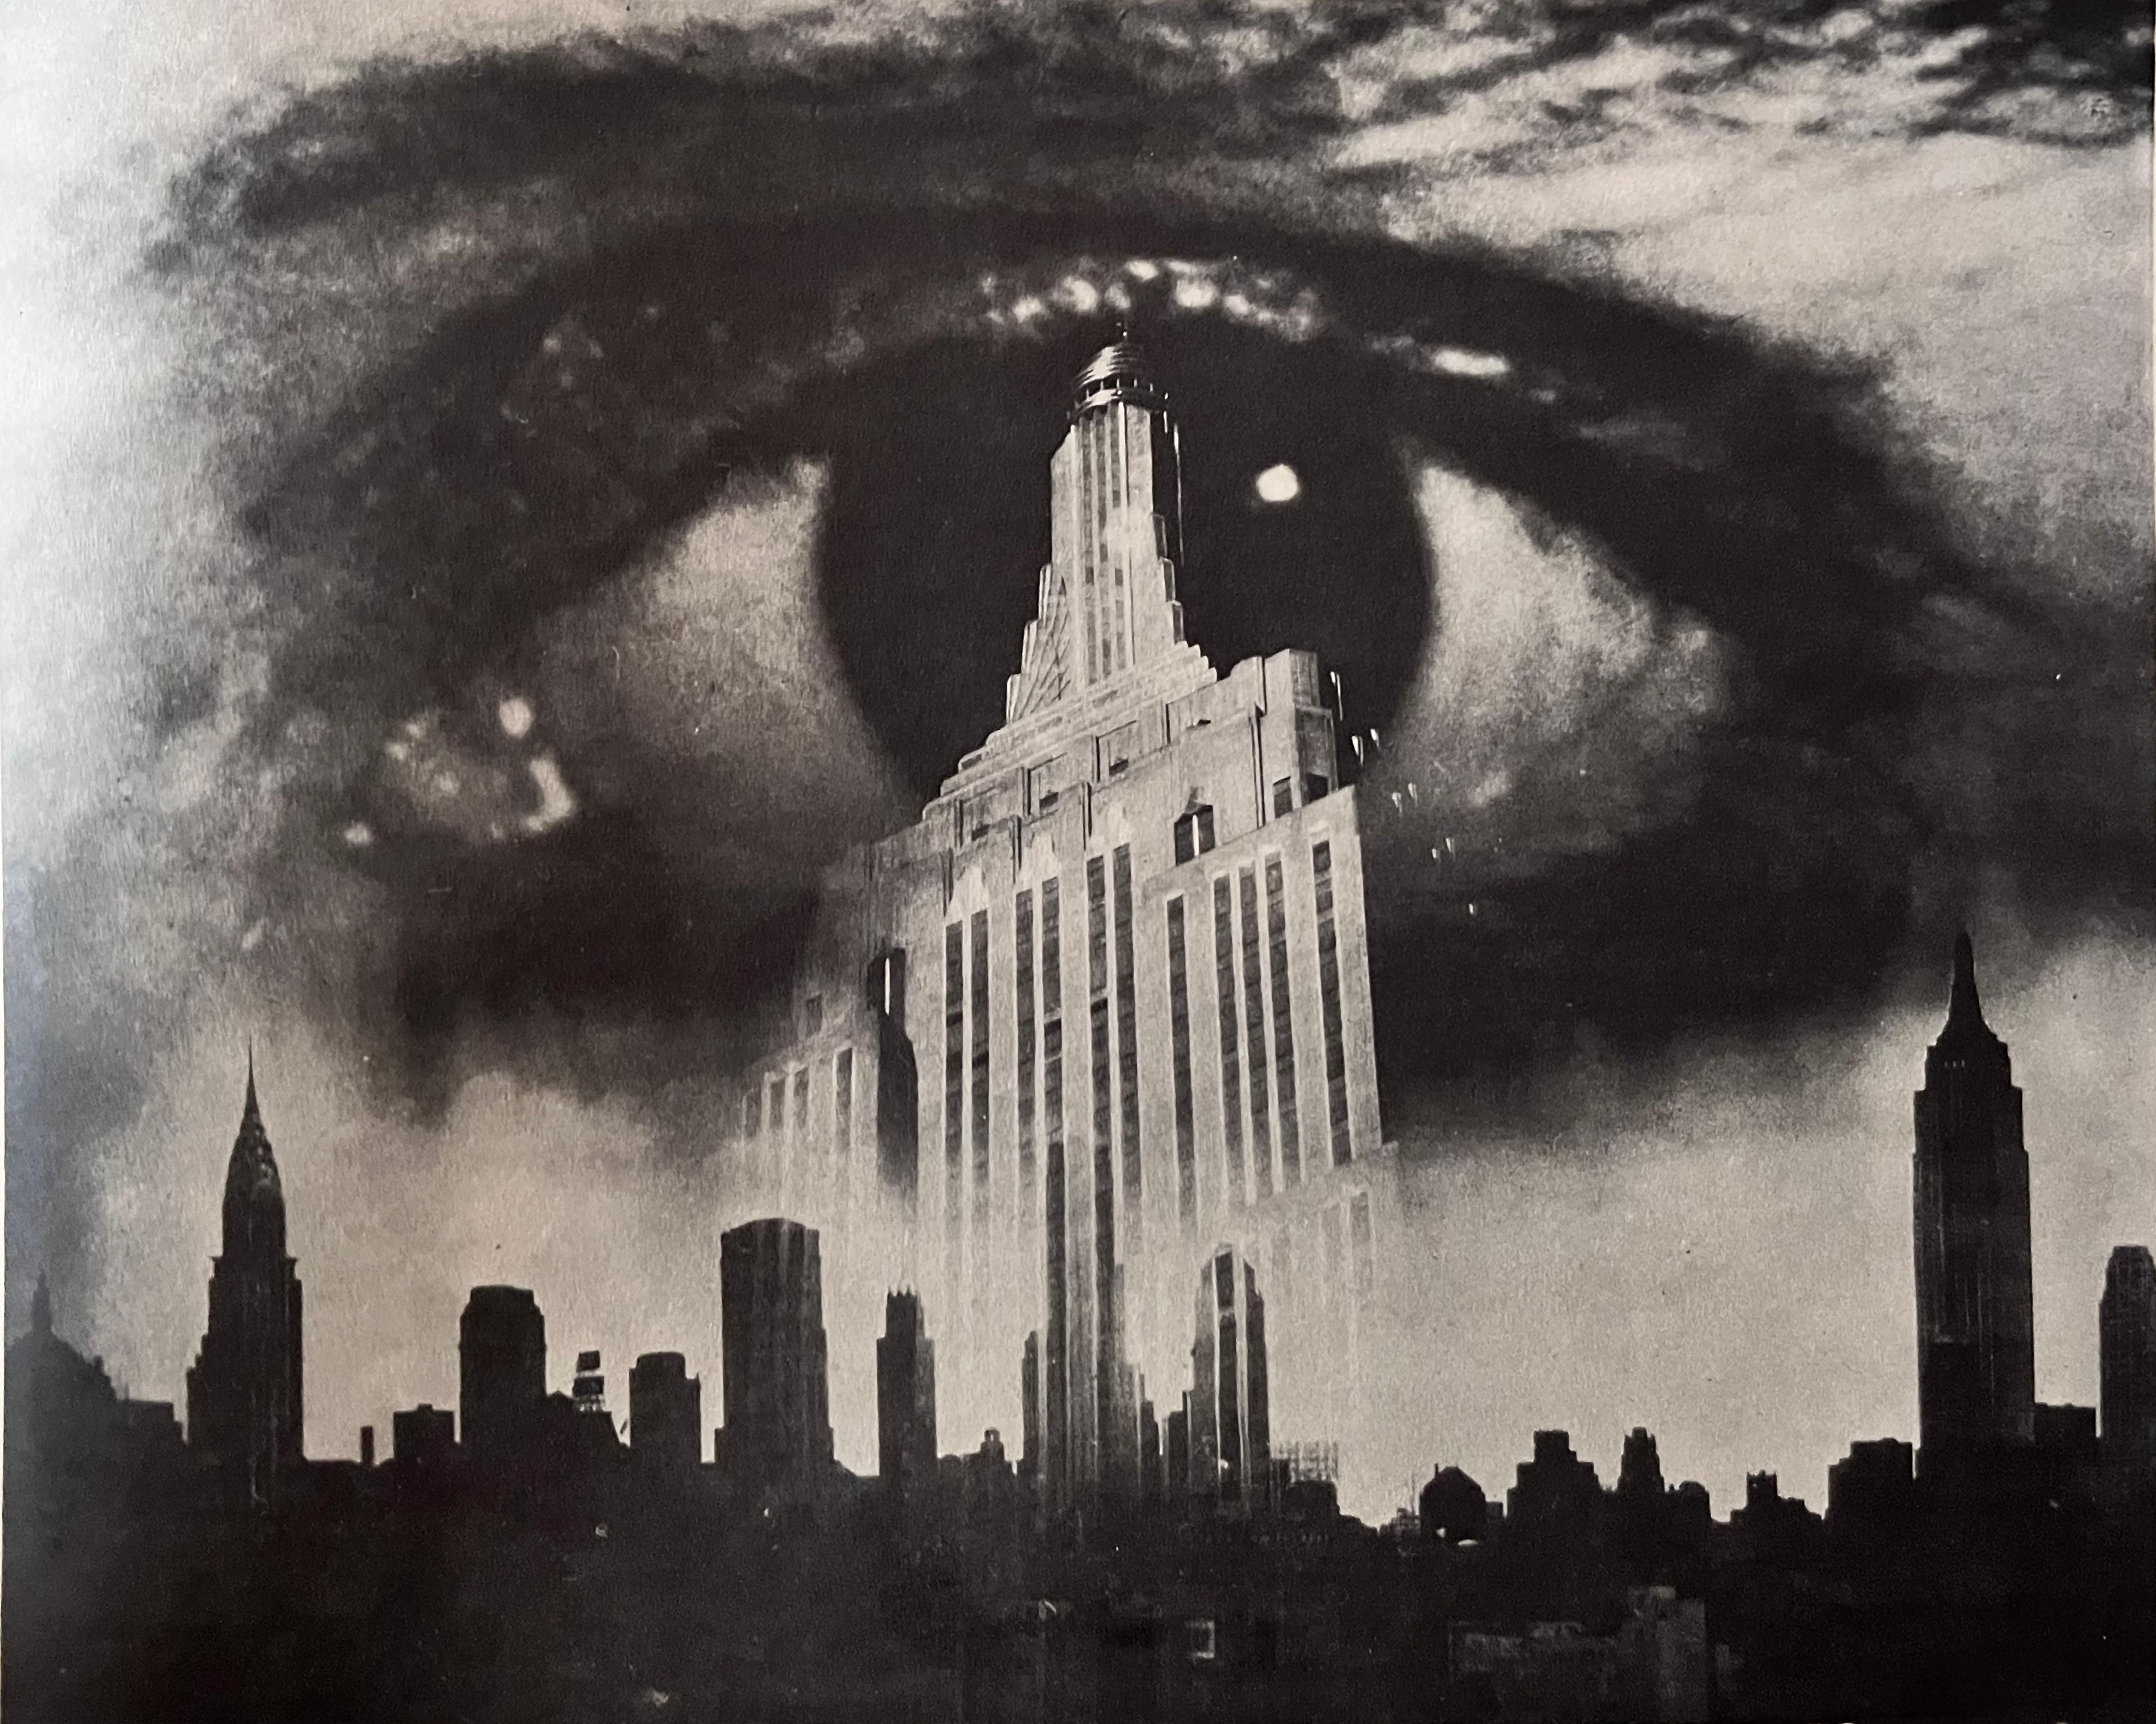 Unknown Abstract Print - Eye On Empire